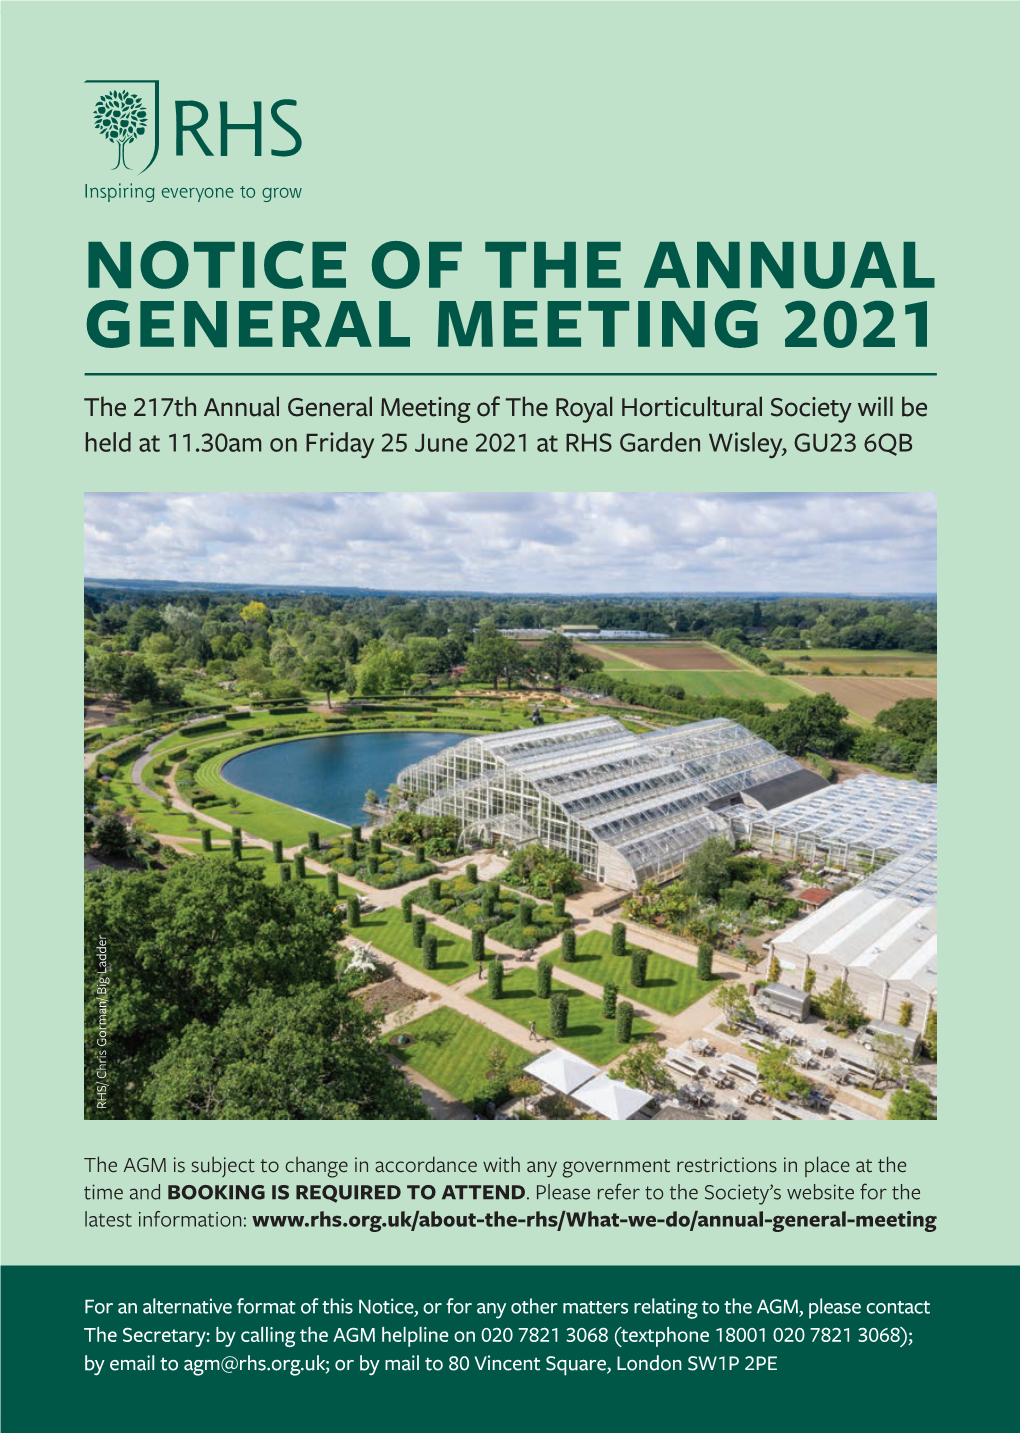 Notice of the Annual General Meeting (AGM) 2021